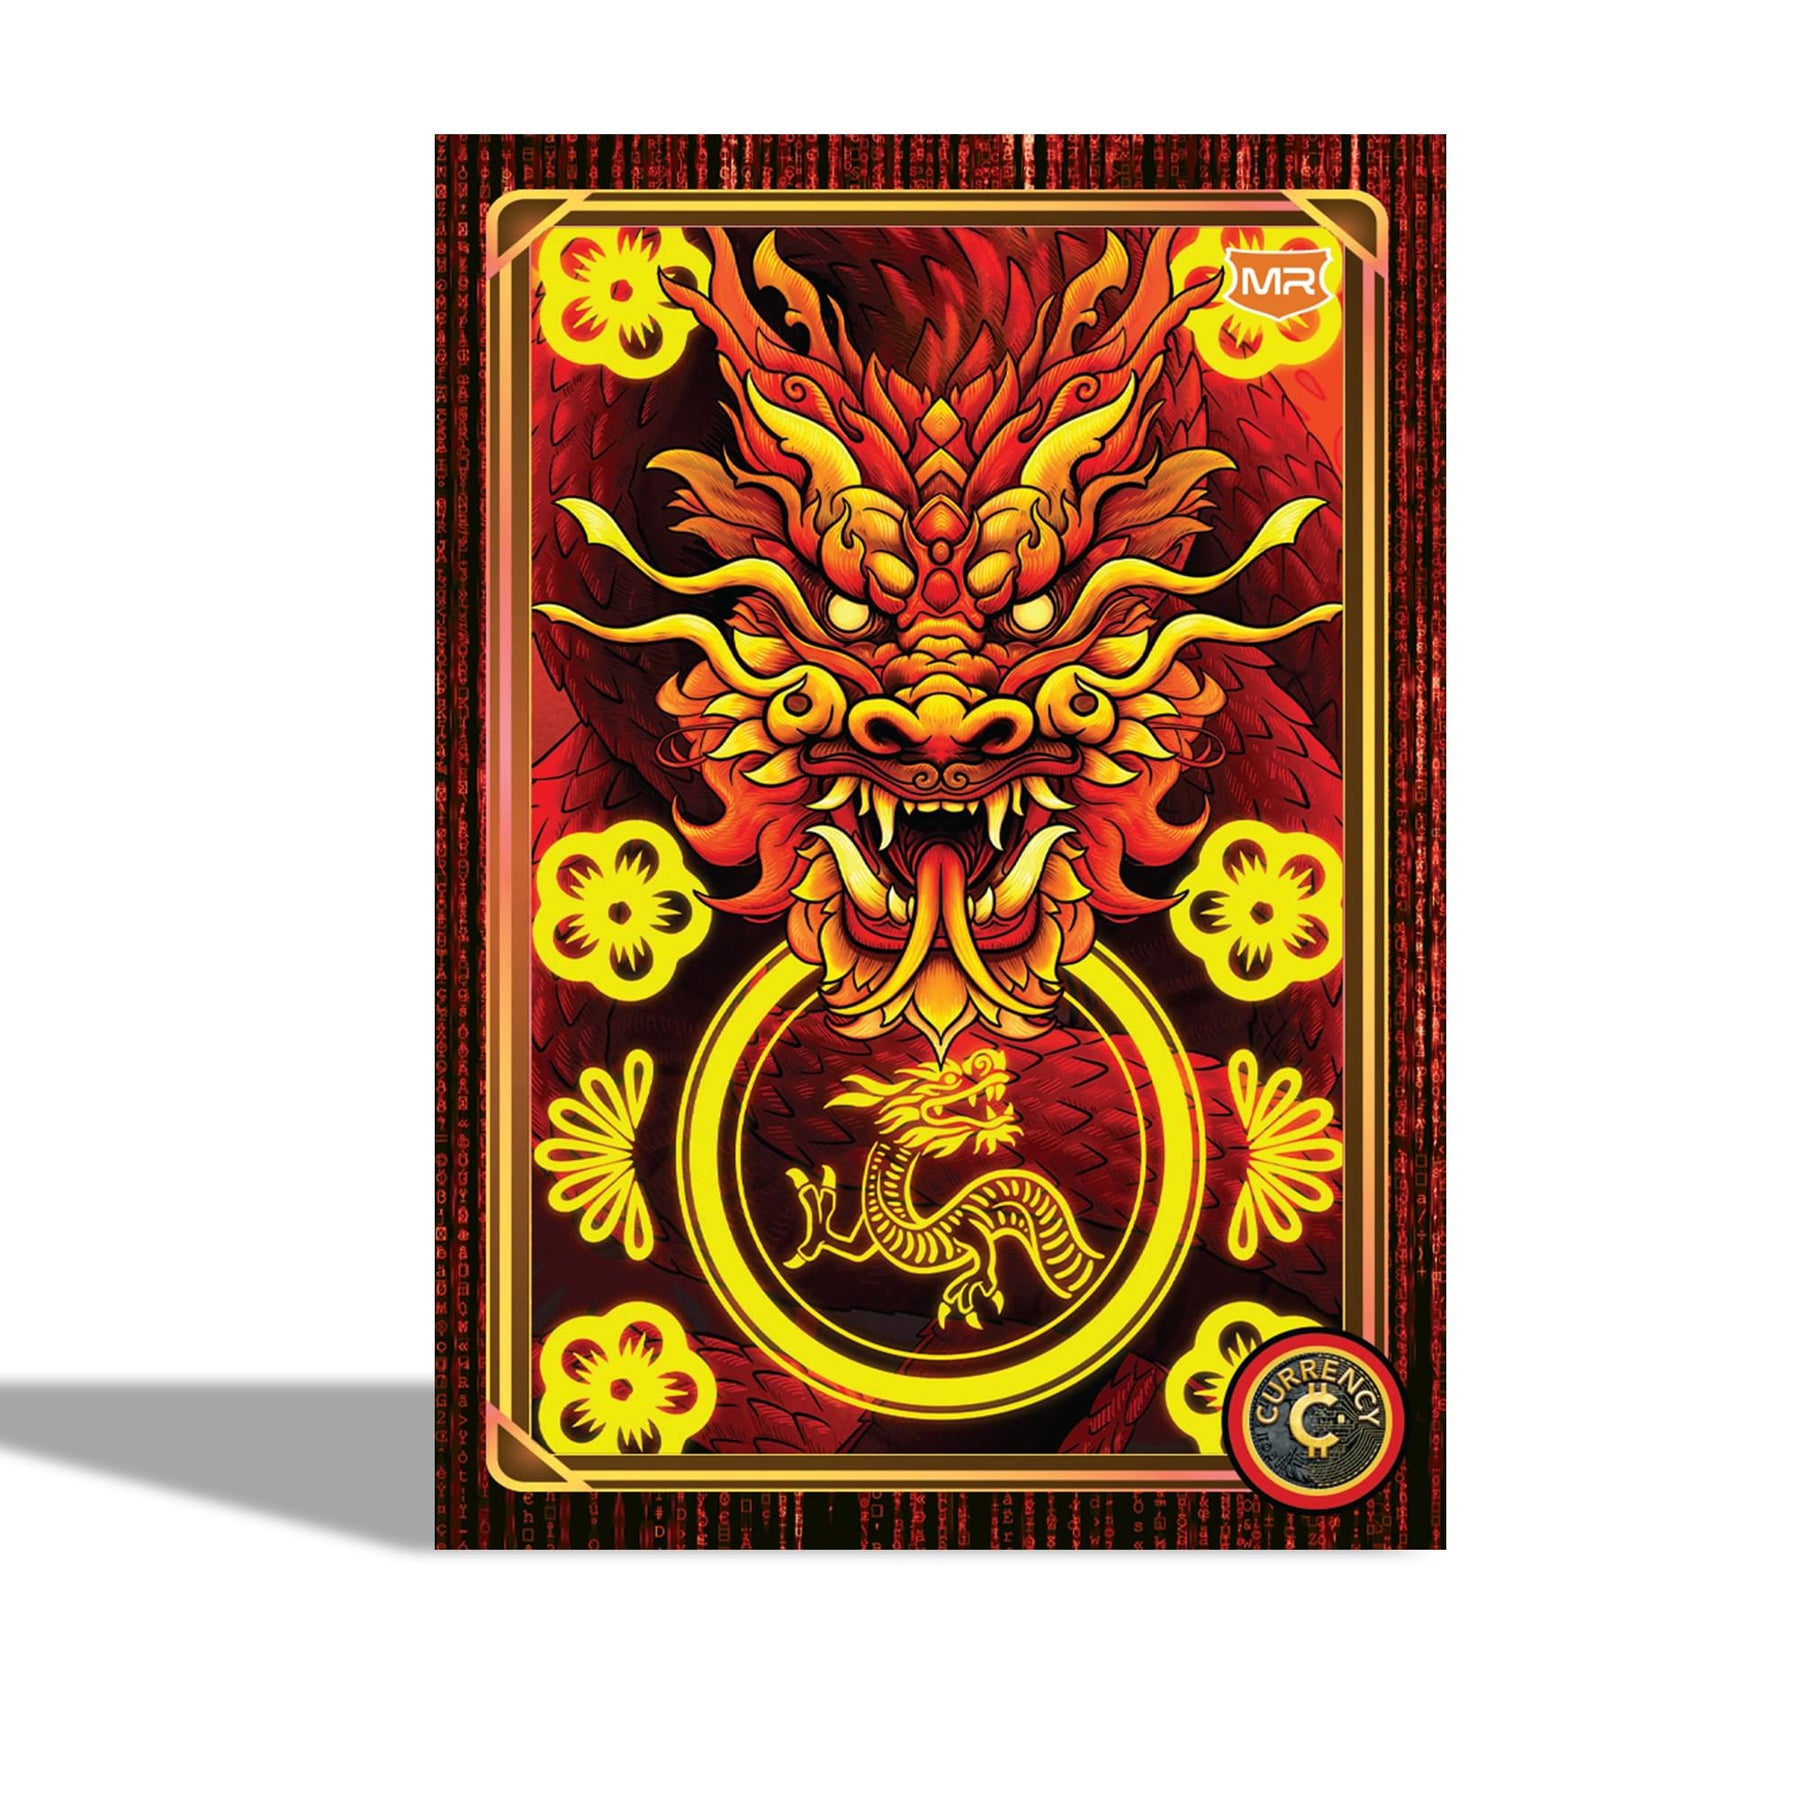 Currency Series 3 Trading Cards Collector Box | 2-Packs